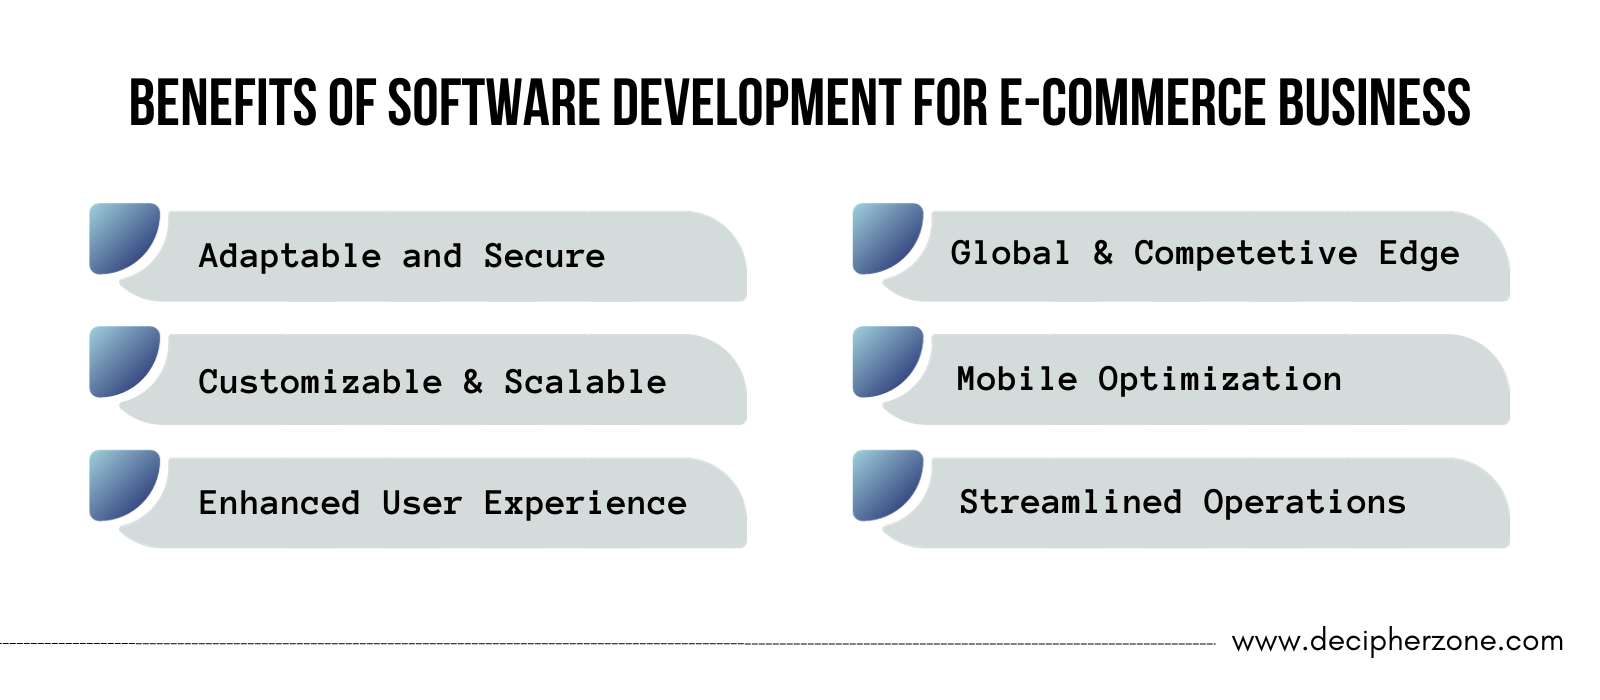 Benefits of Software Development For E-commerce Business